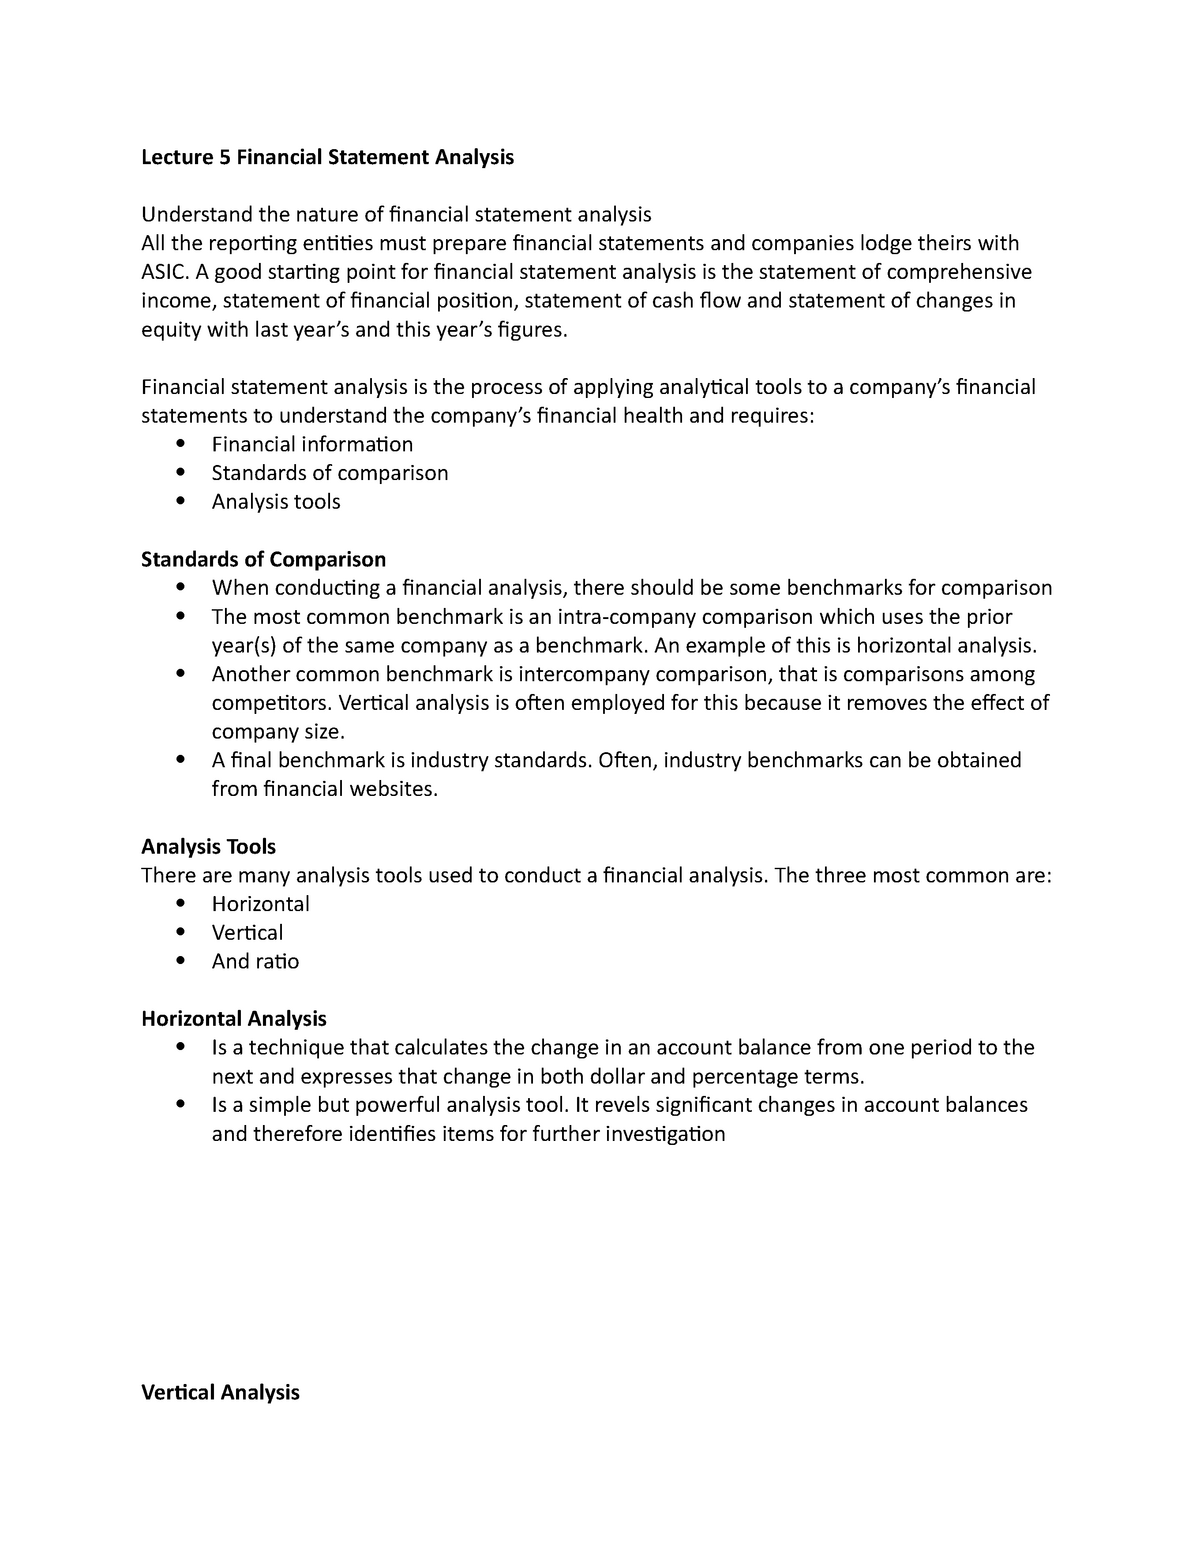 literature review of financial statement analysis pdf